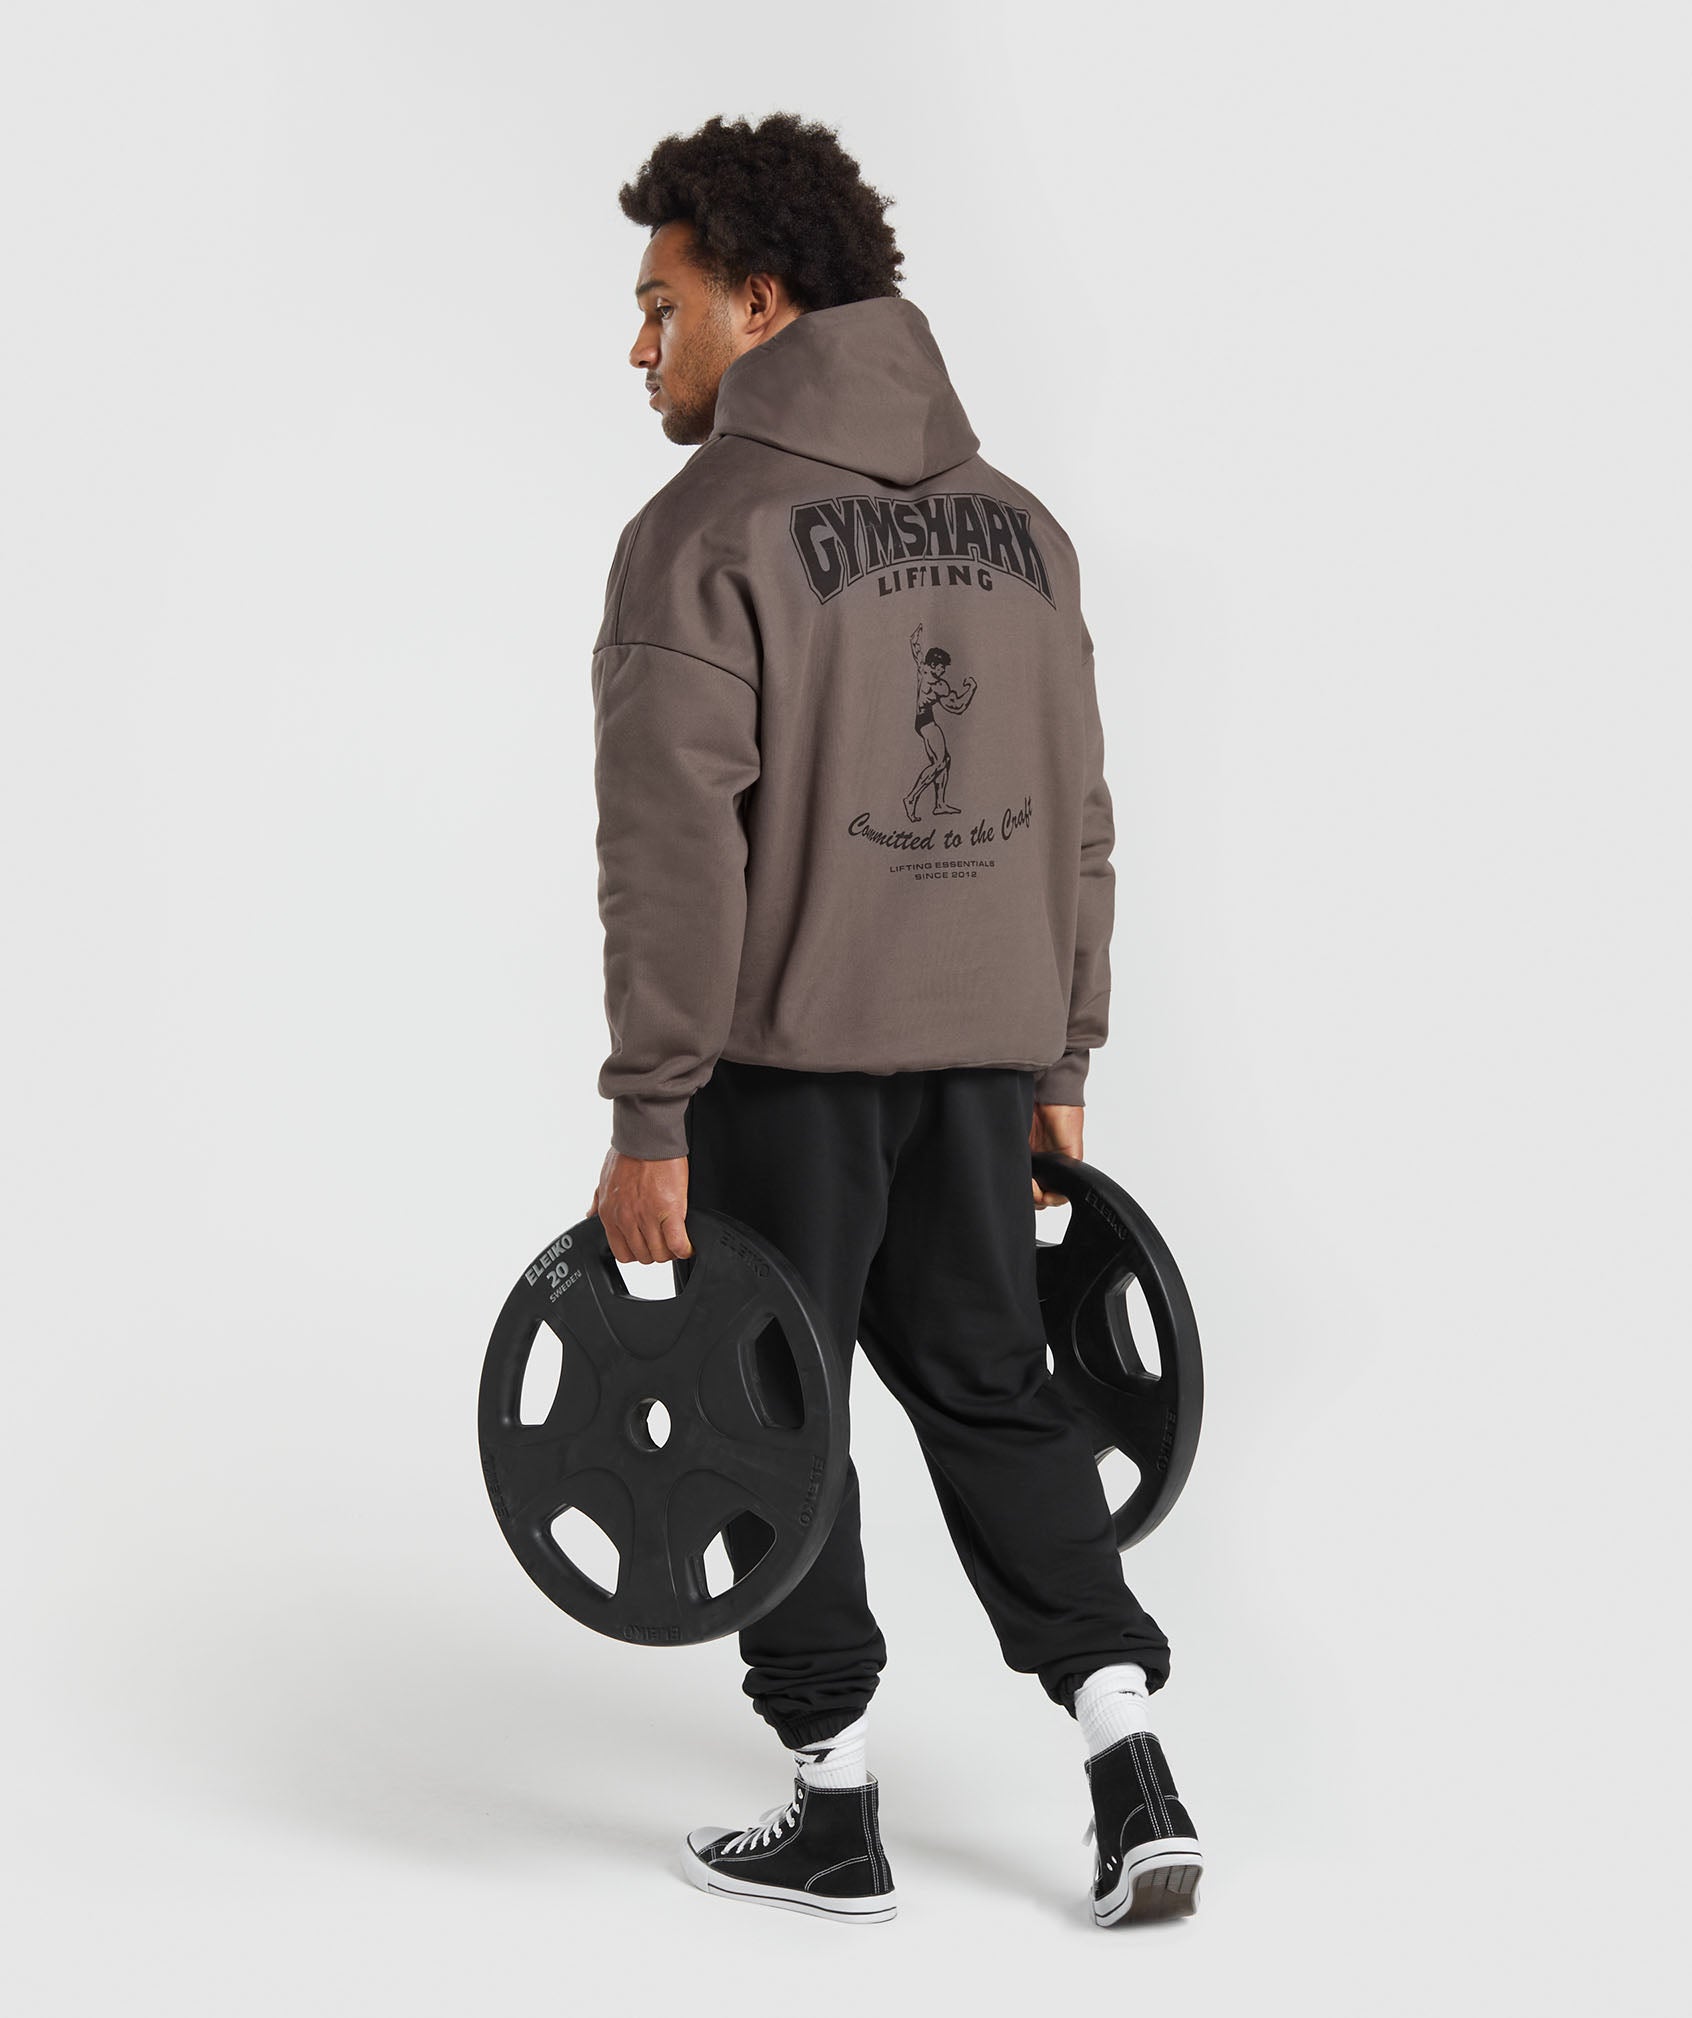 Committed to the Craft Hoodie in Dusty Brown - view 4